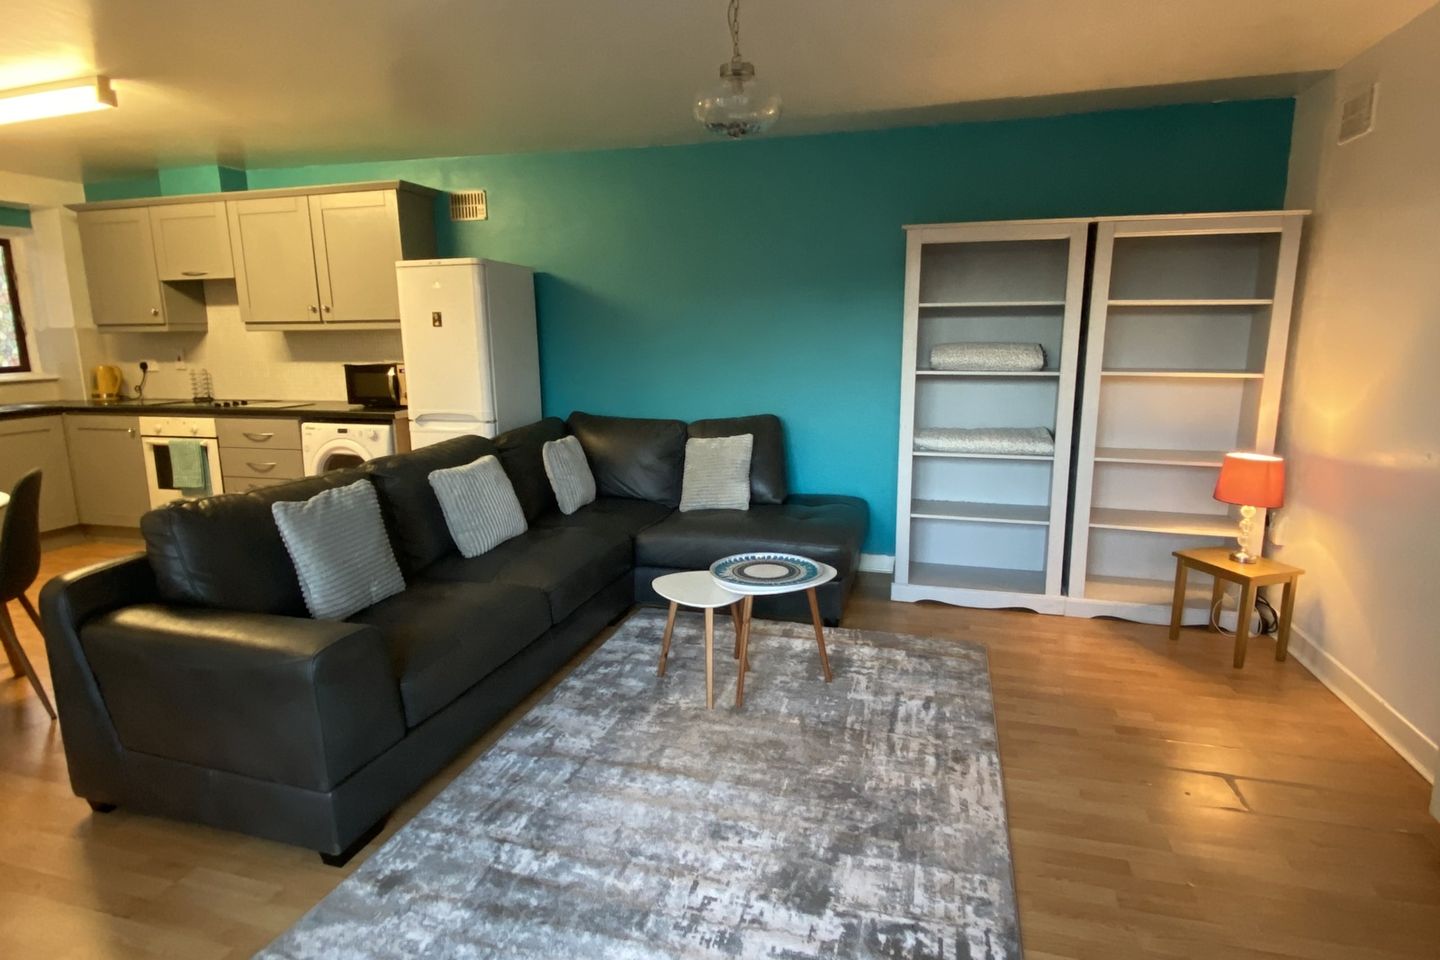 Apartment 8, Penrose Court, Waterford City, Co. Waterford, X91WN88